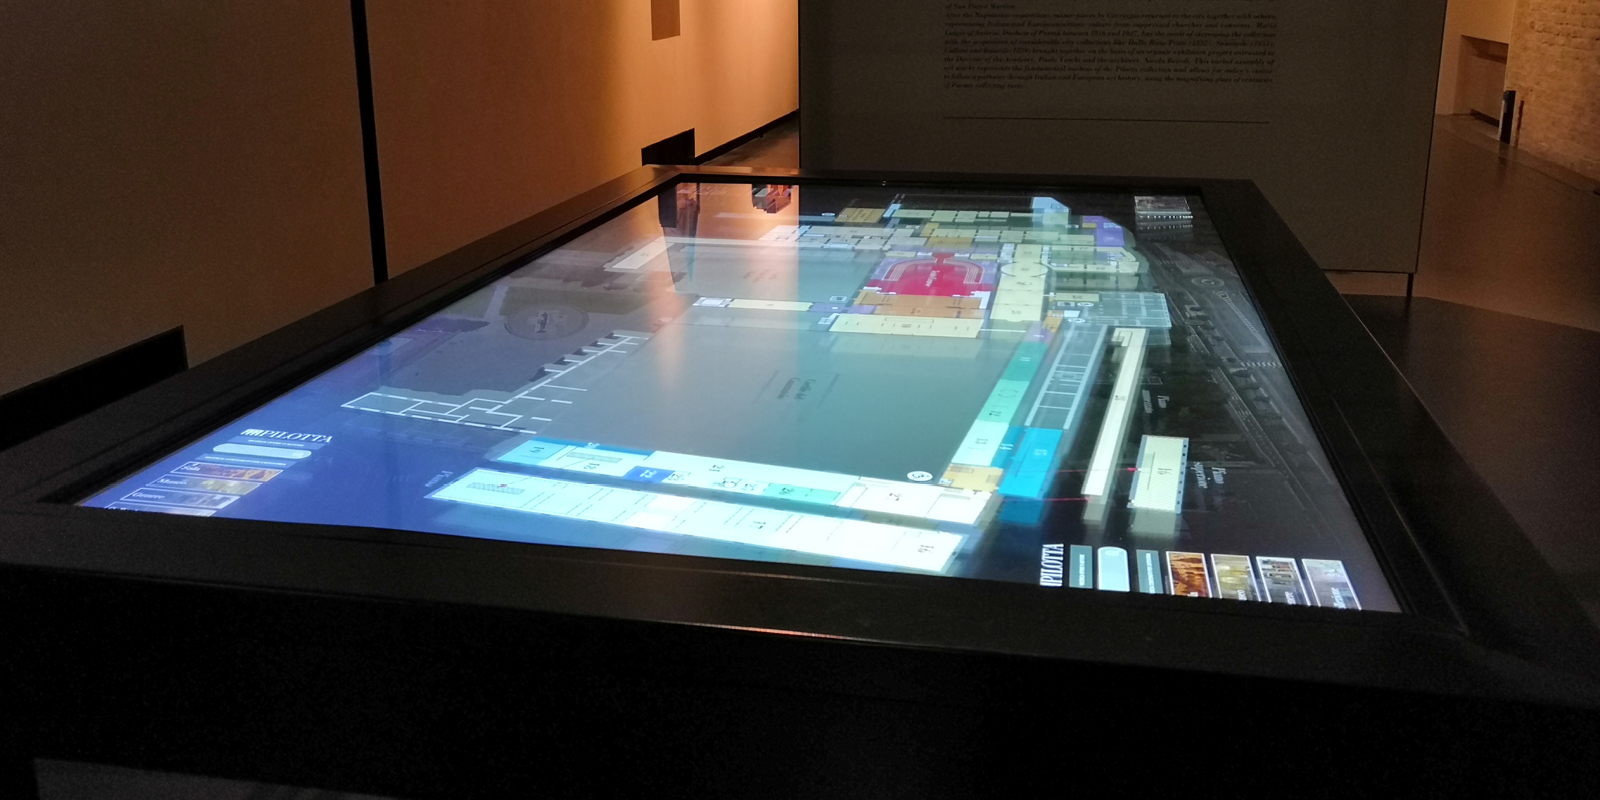 Touchwindow - A new dimension for art